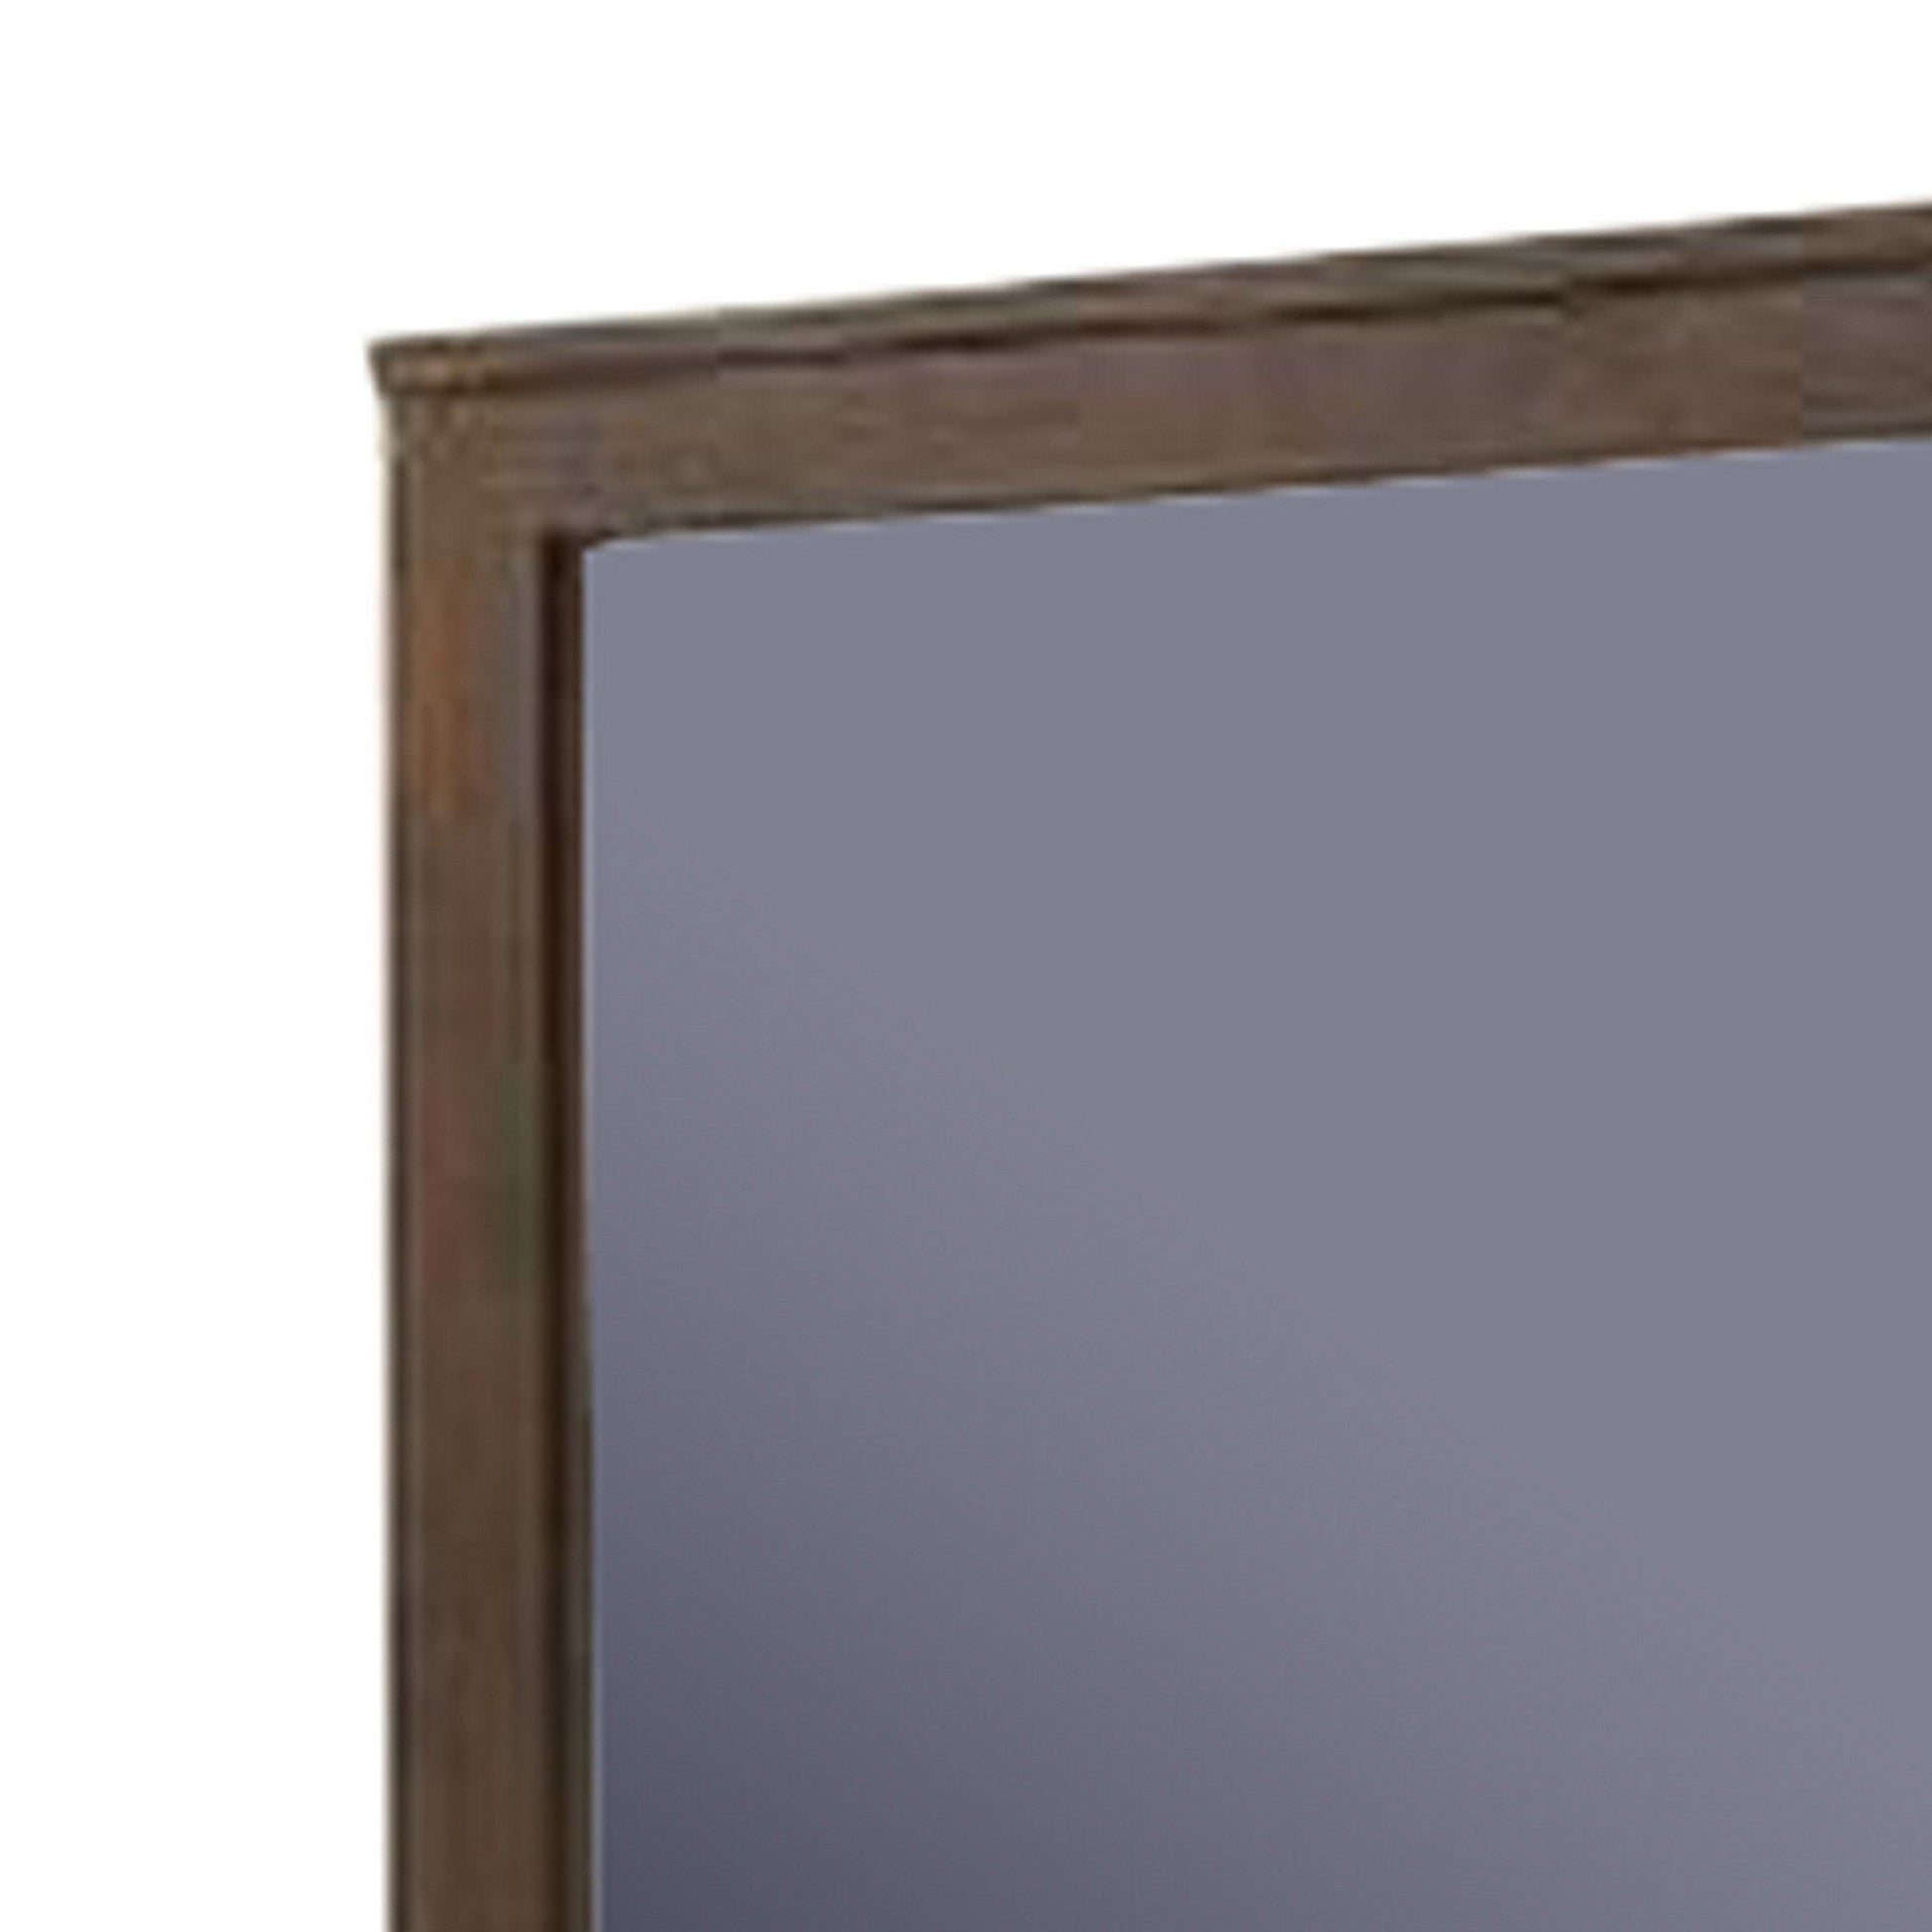 Benzara Brown Wall Mirror With Rectangular Frame and Molded Details